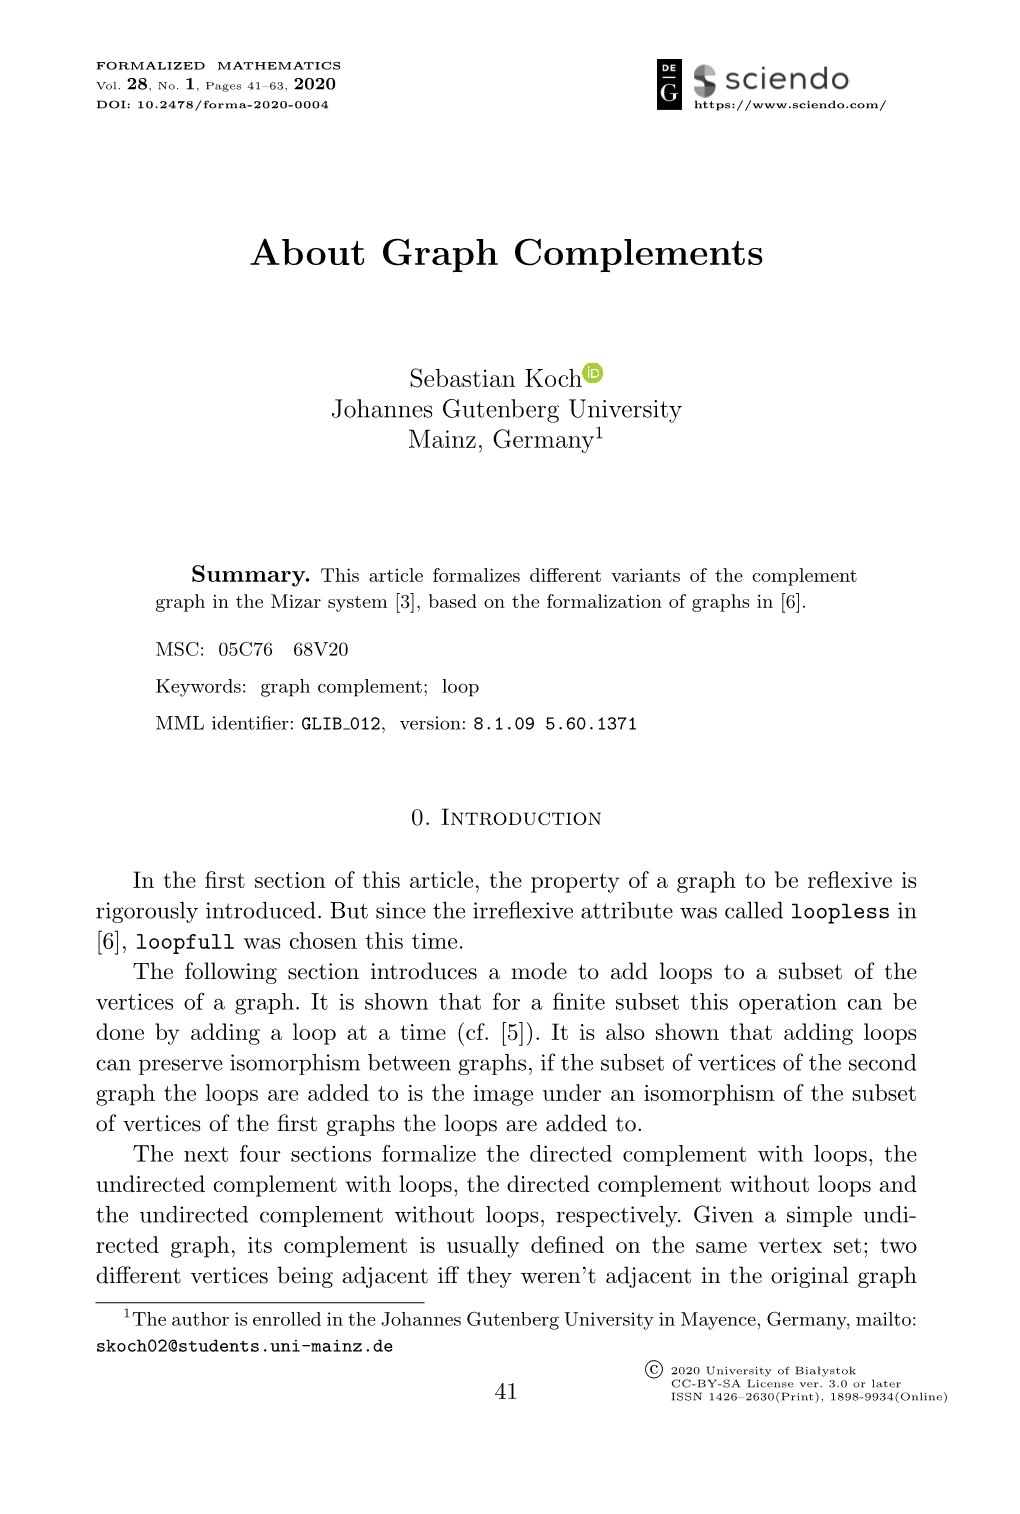 About Graph Complements